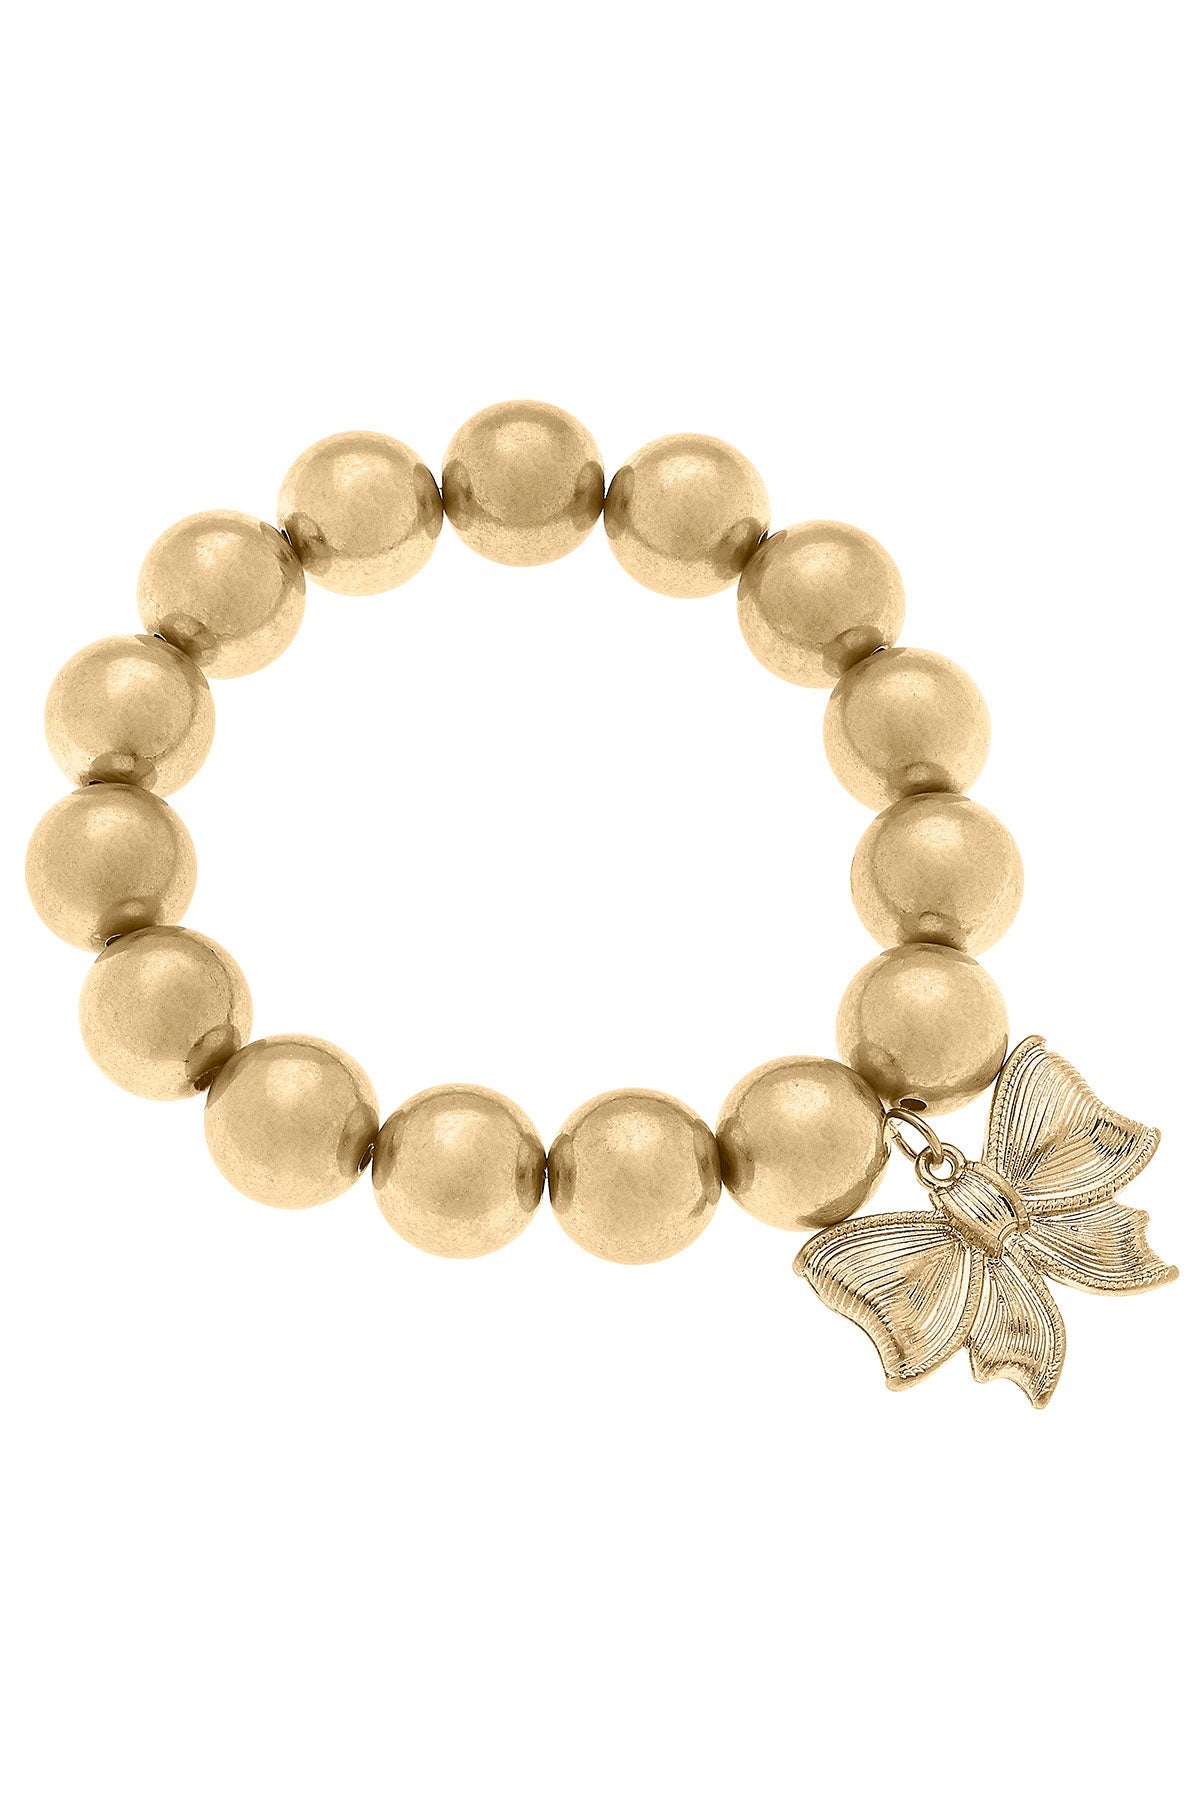 Waverly Bow Charm Ball Bead Stretch Bracelet in Worn Gold by CANVAS